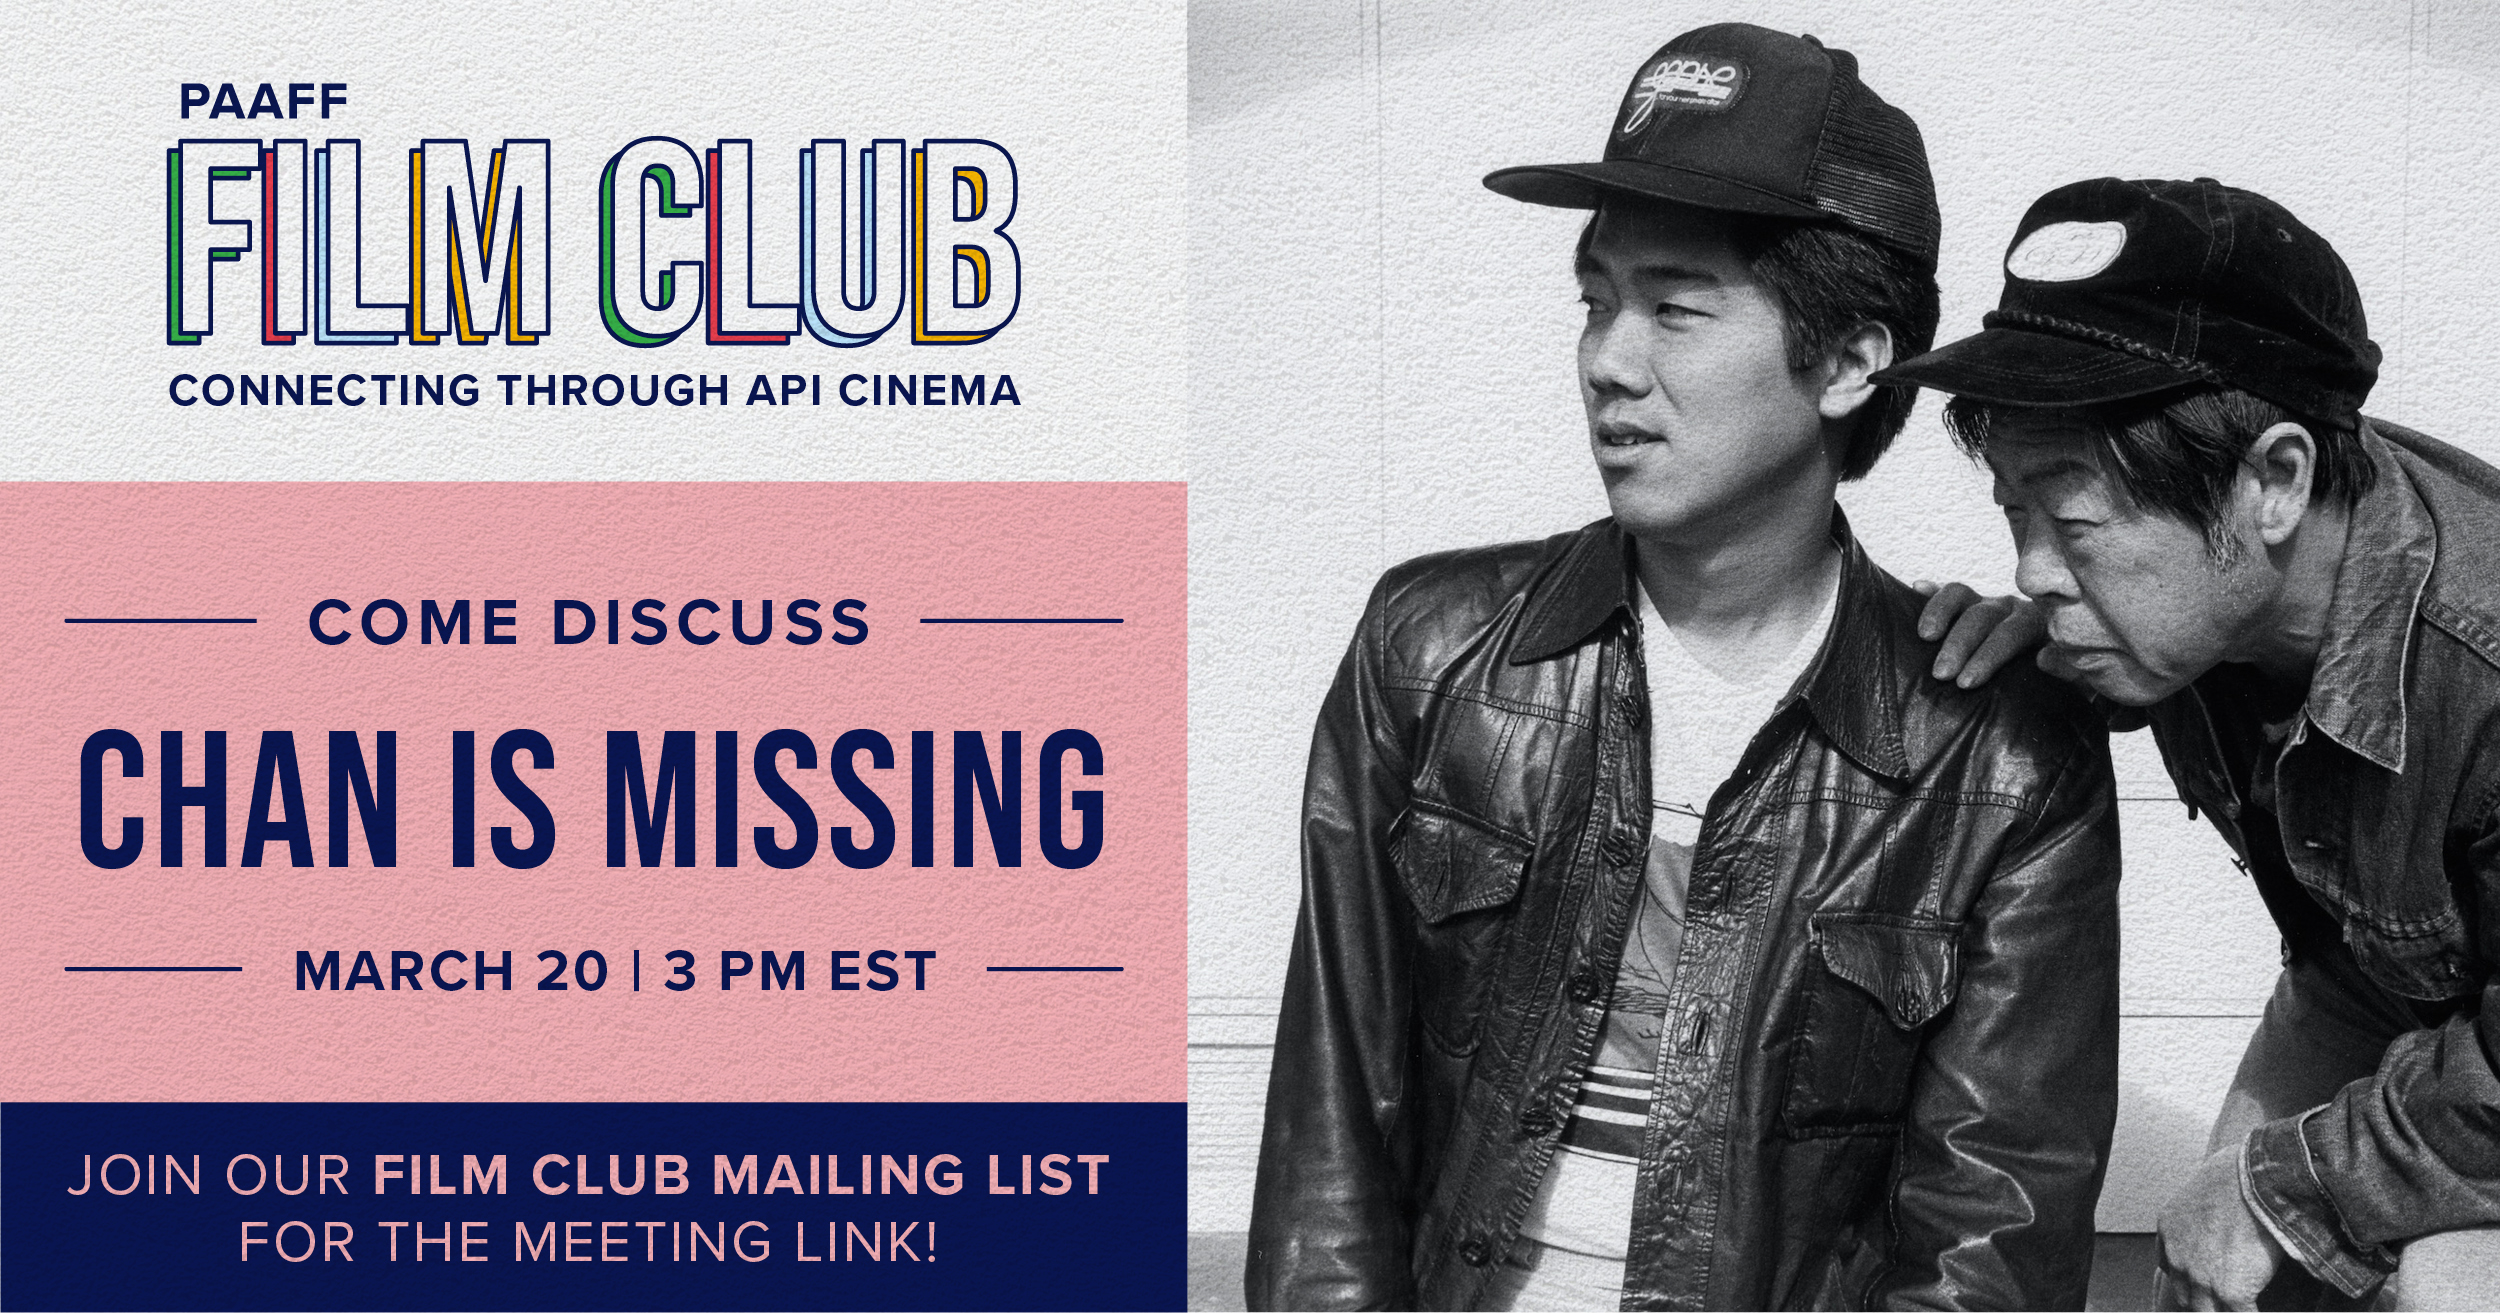 PAAFF March 2021 Film Club Graphic - Reads "Come discuss Chan Is Missing - March 20 | 3 PM EST. Join our Film Club Mailing List for the meeting link!" Two men wearing hats looking to the left in black and white.